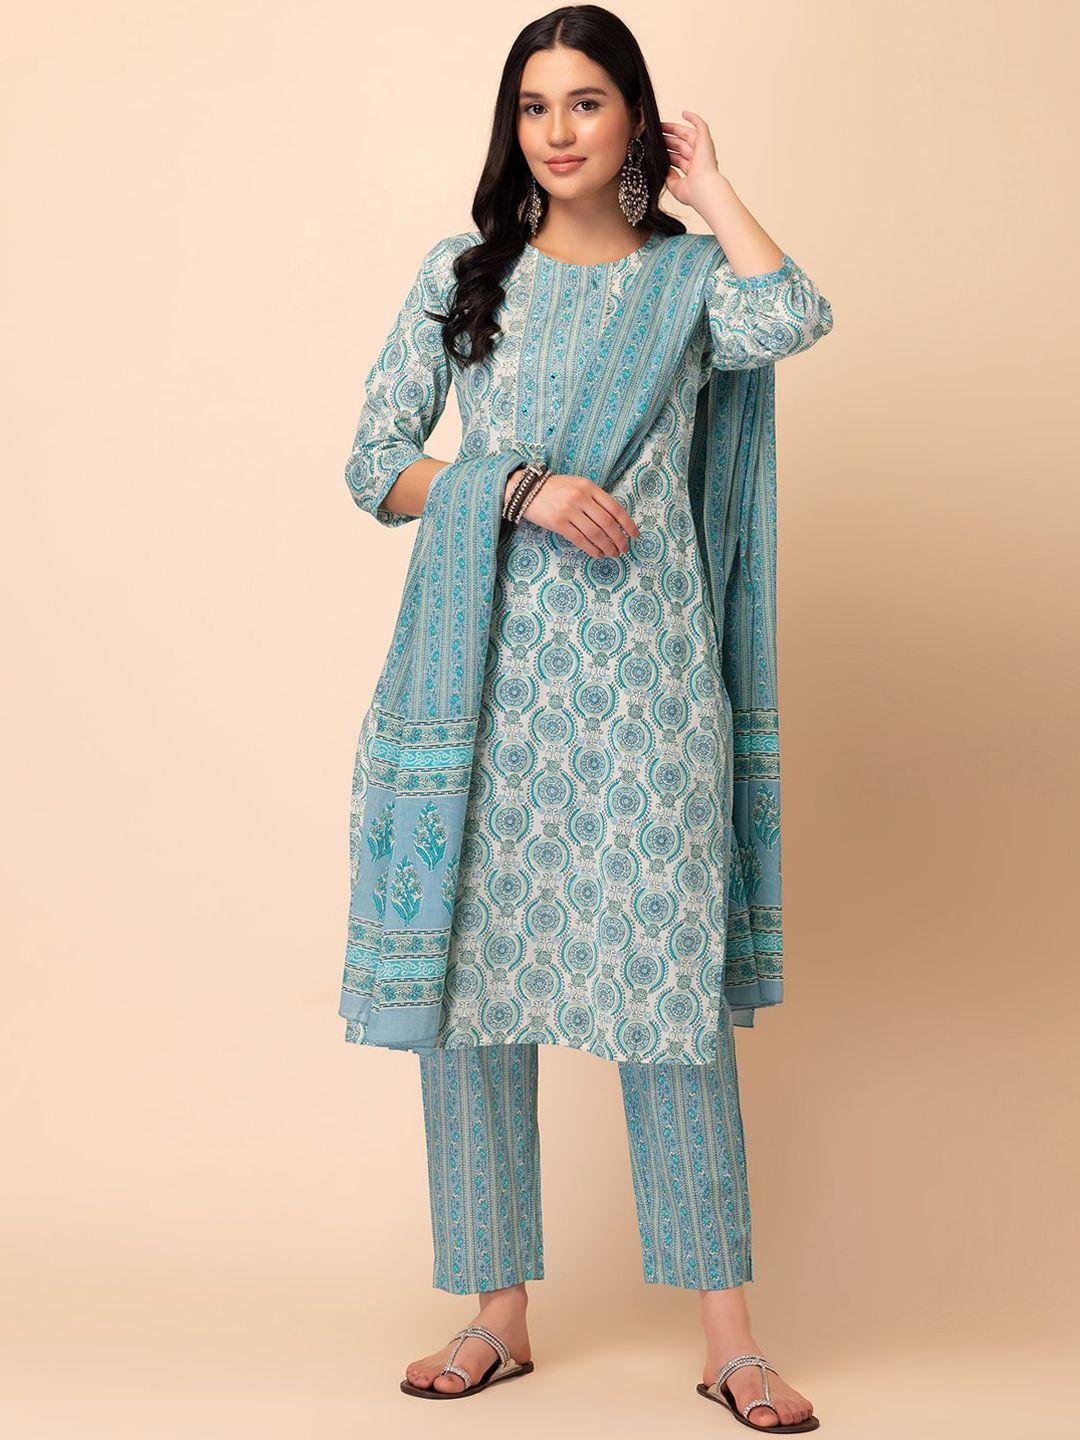 rang by indya floral block printed thread work pure cotton kurta with trouser & dupatta